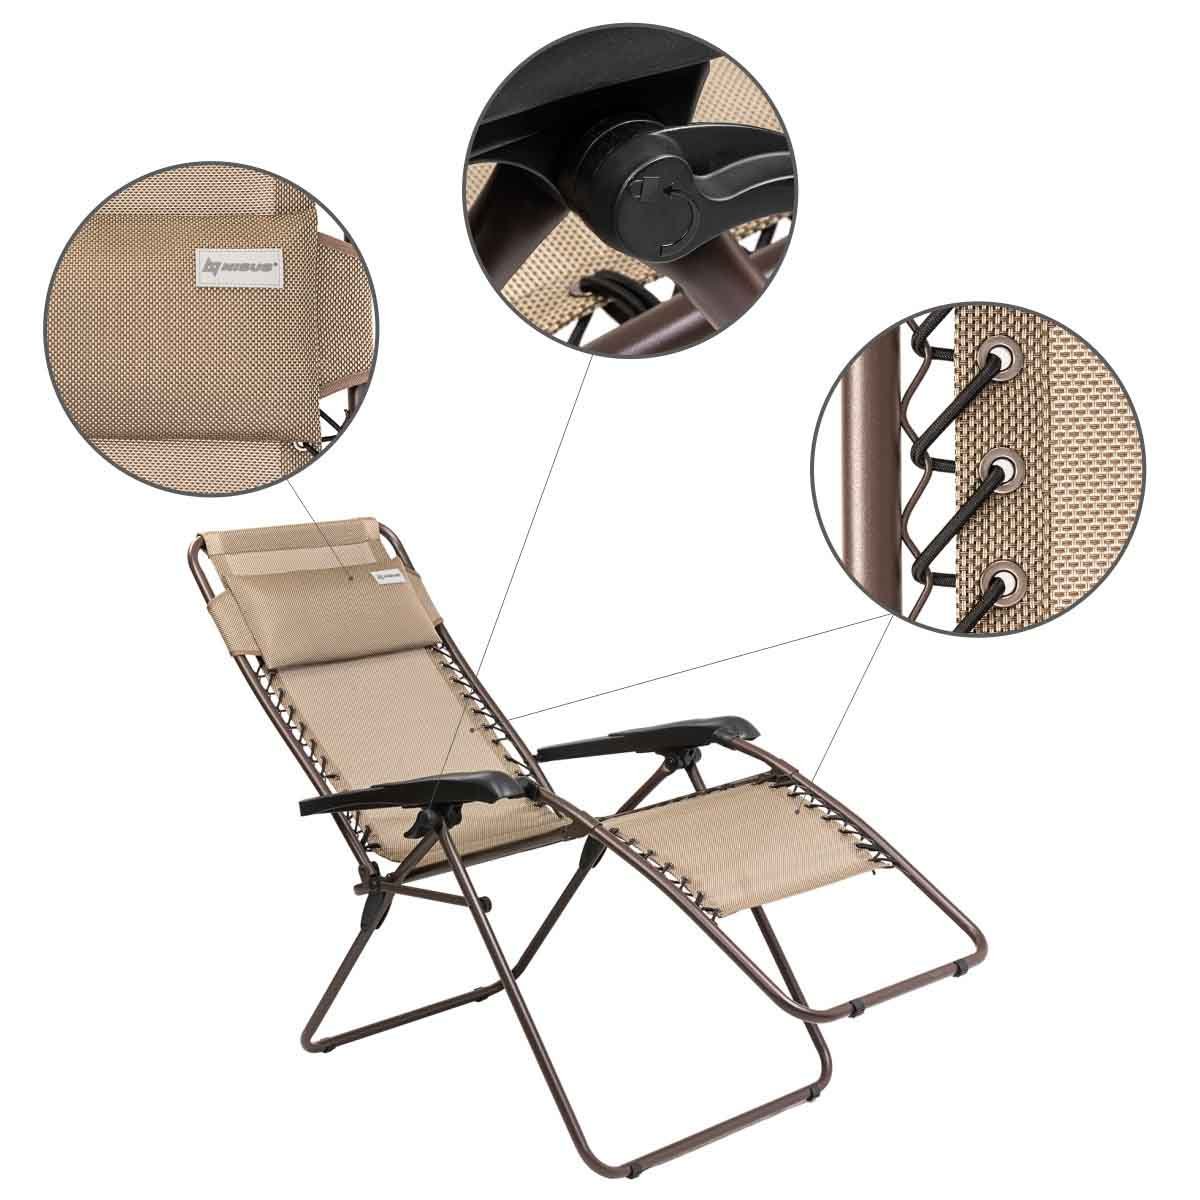 Zero Gravity Folding Patio Chair with Padded Pillow, is a perfect example of highest quality product